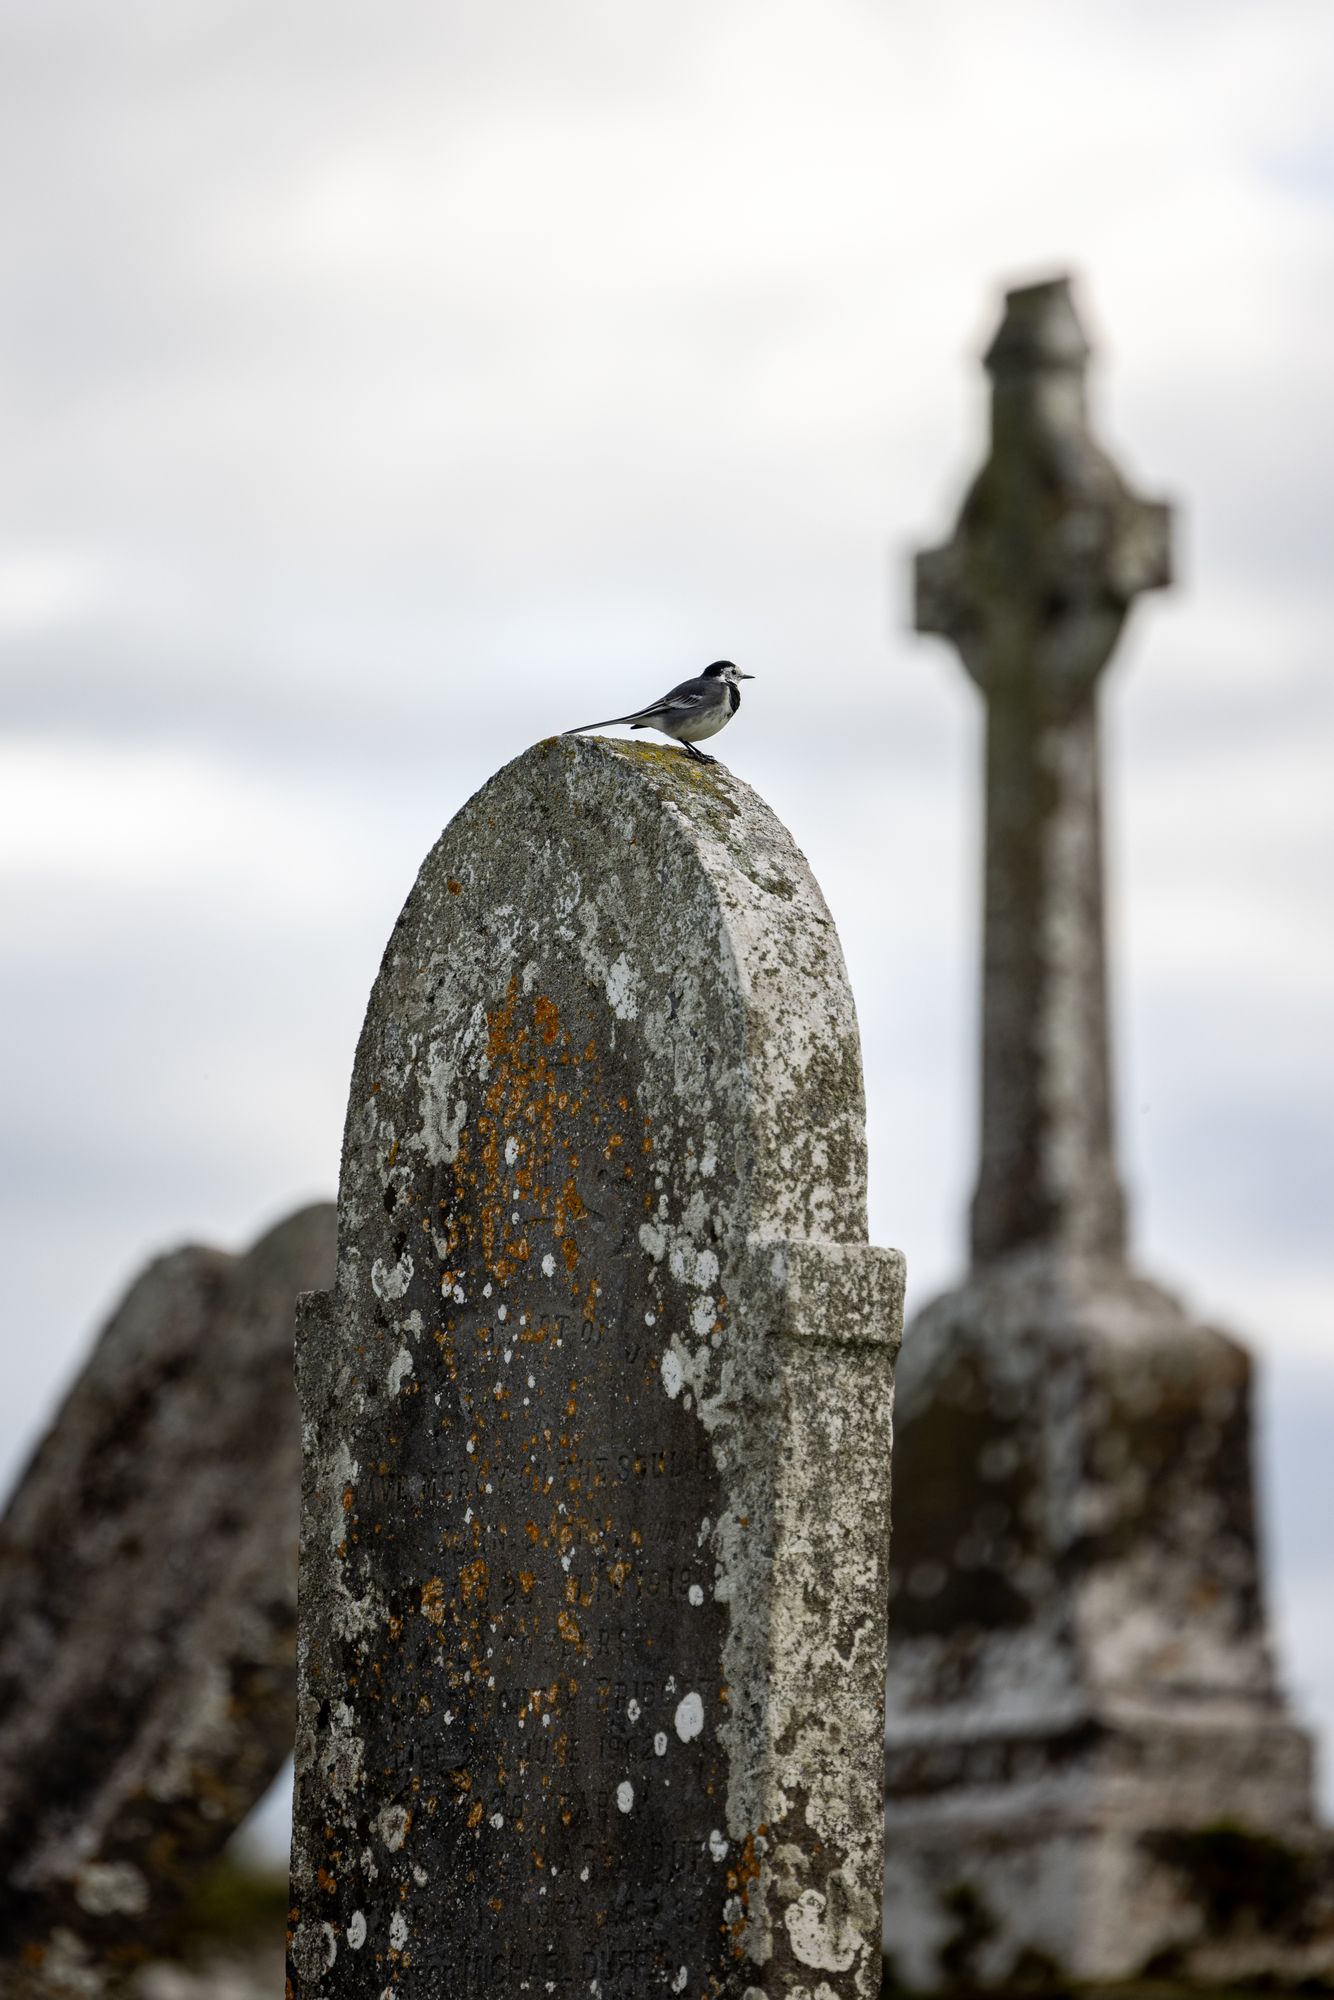 Pied wagtail bird resting on a tombstone.  Though the background is blurry, the shape of a stone cross can be seen.